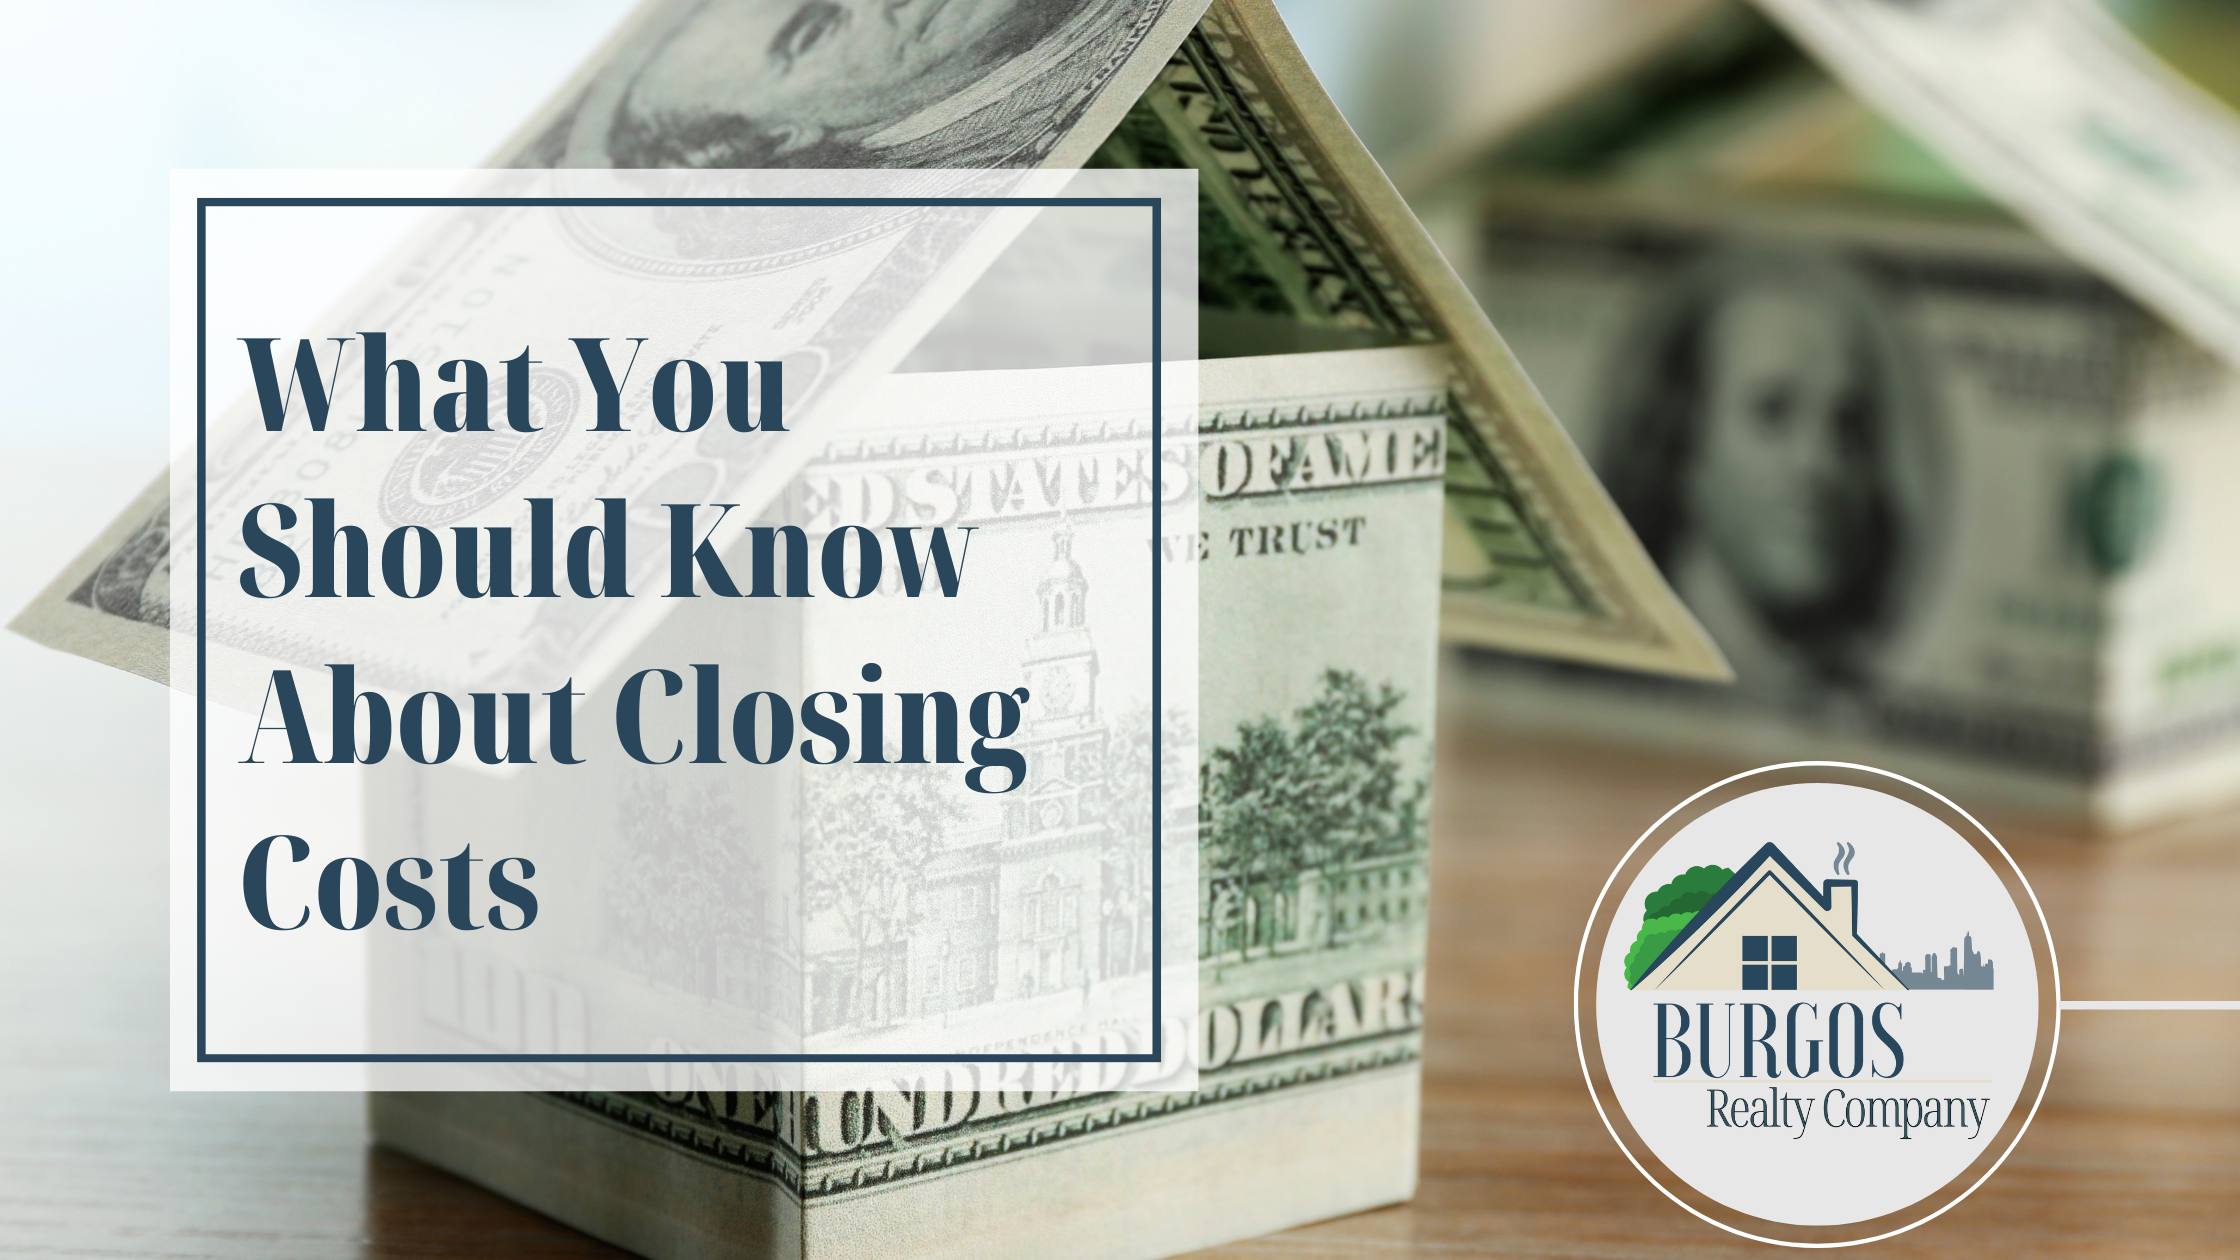 BurgosRealty_Blog_What You Should Know About Closing Costs